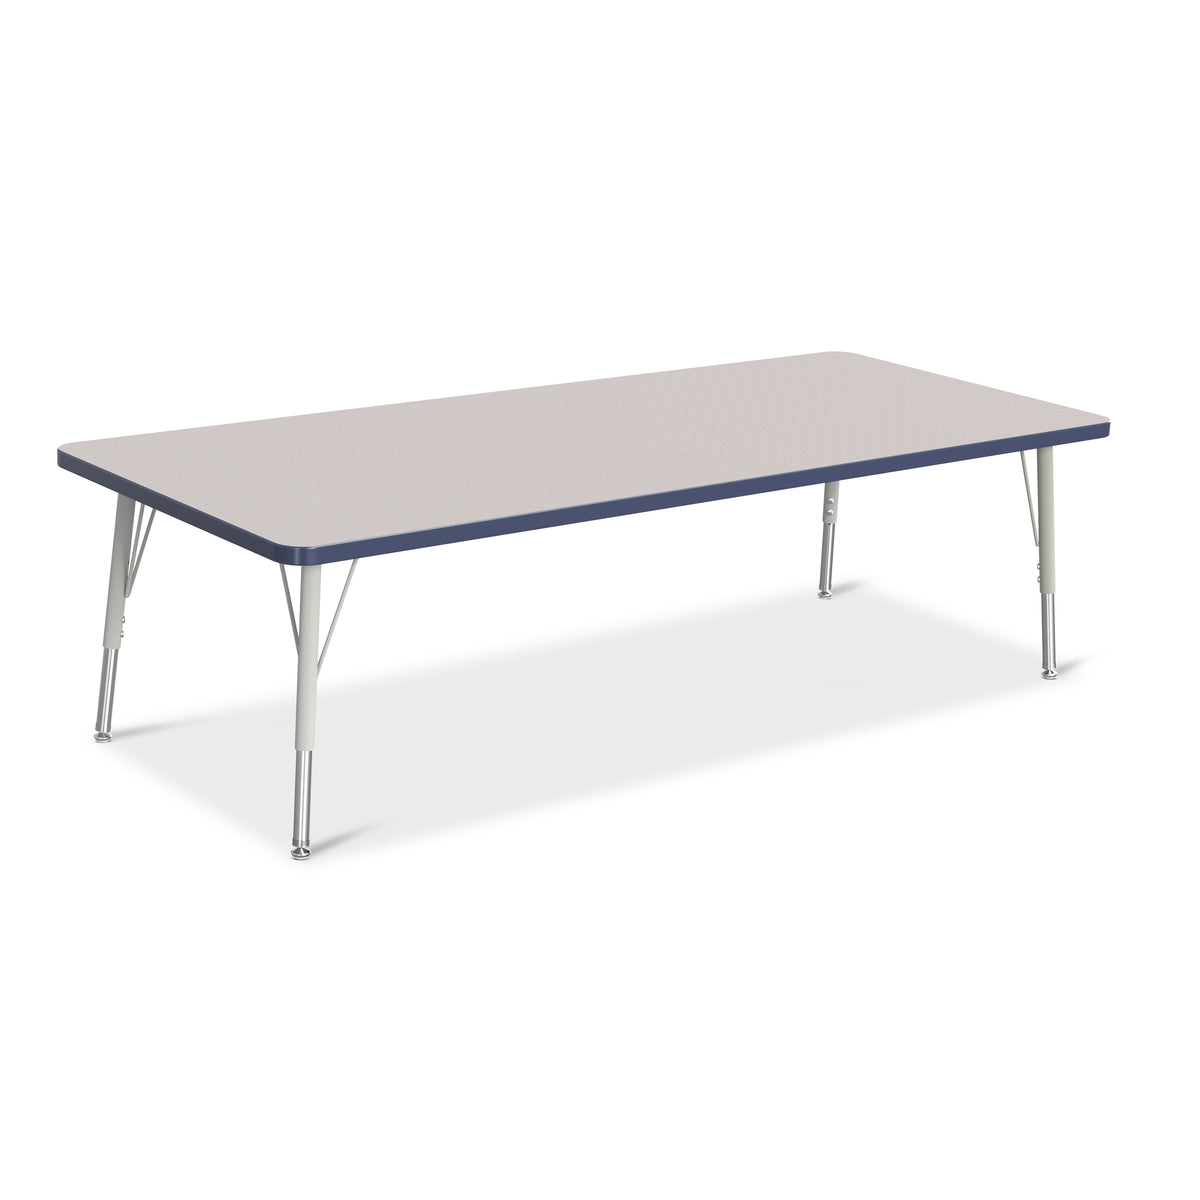 6413JCE112, Berries Rectangle Activity Table - 30" X 72", E-height - Freckled Gray/Navy/Gray